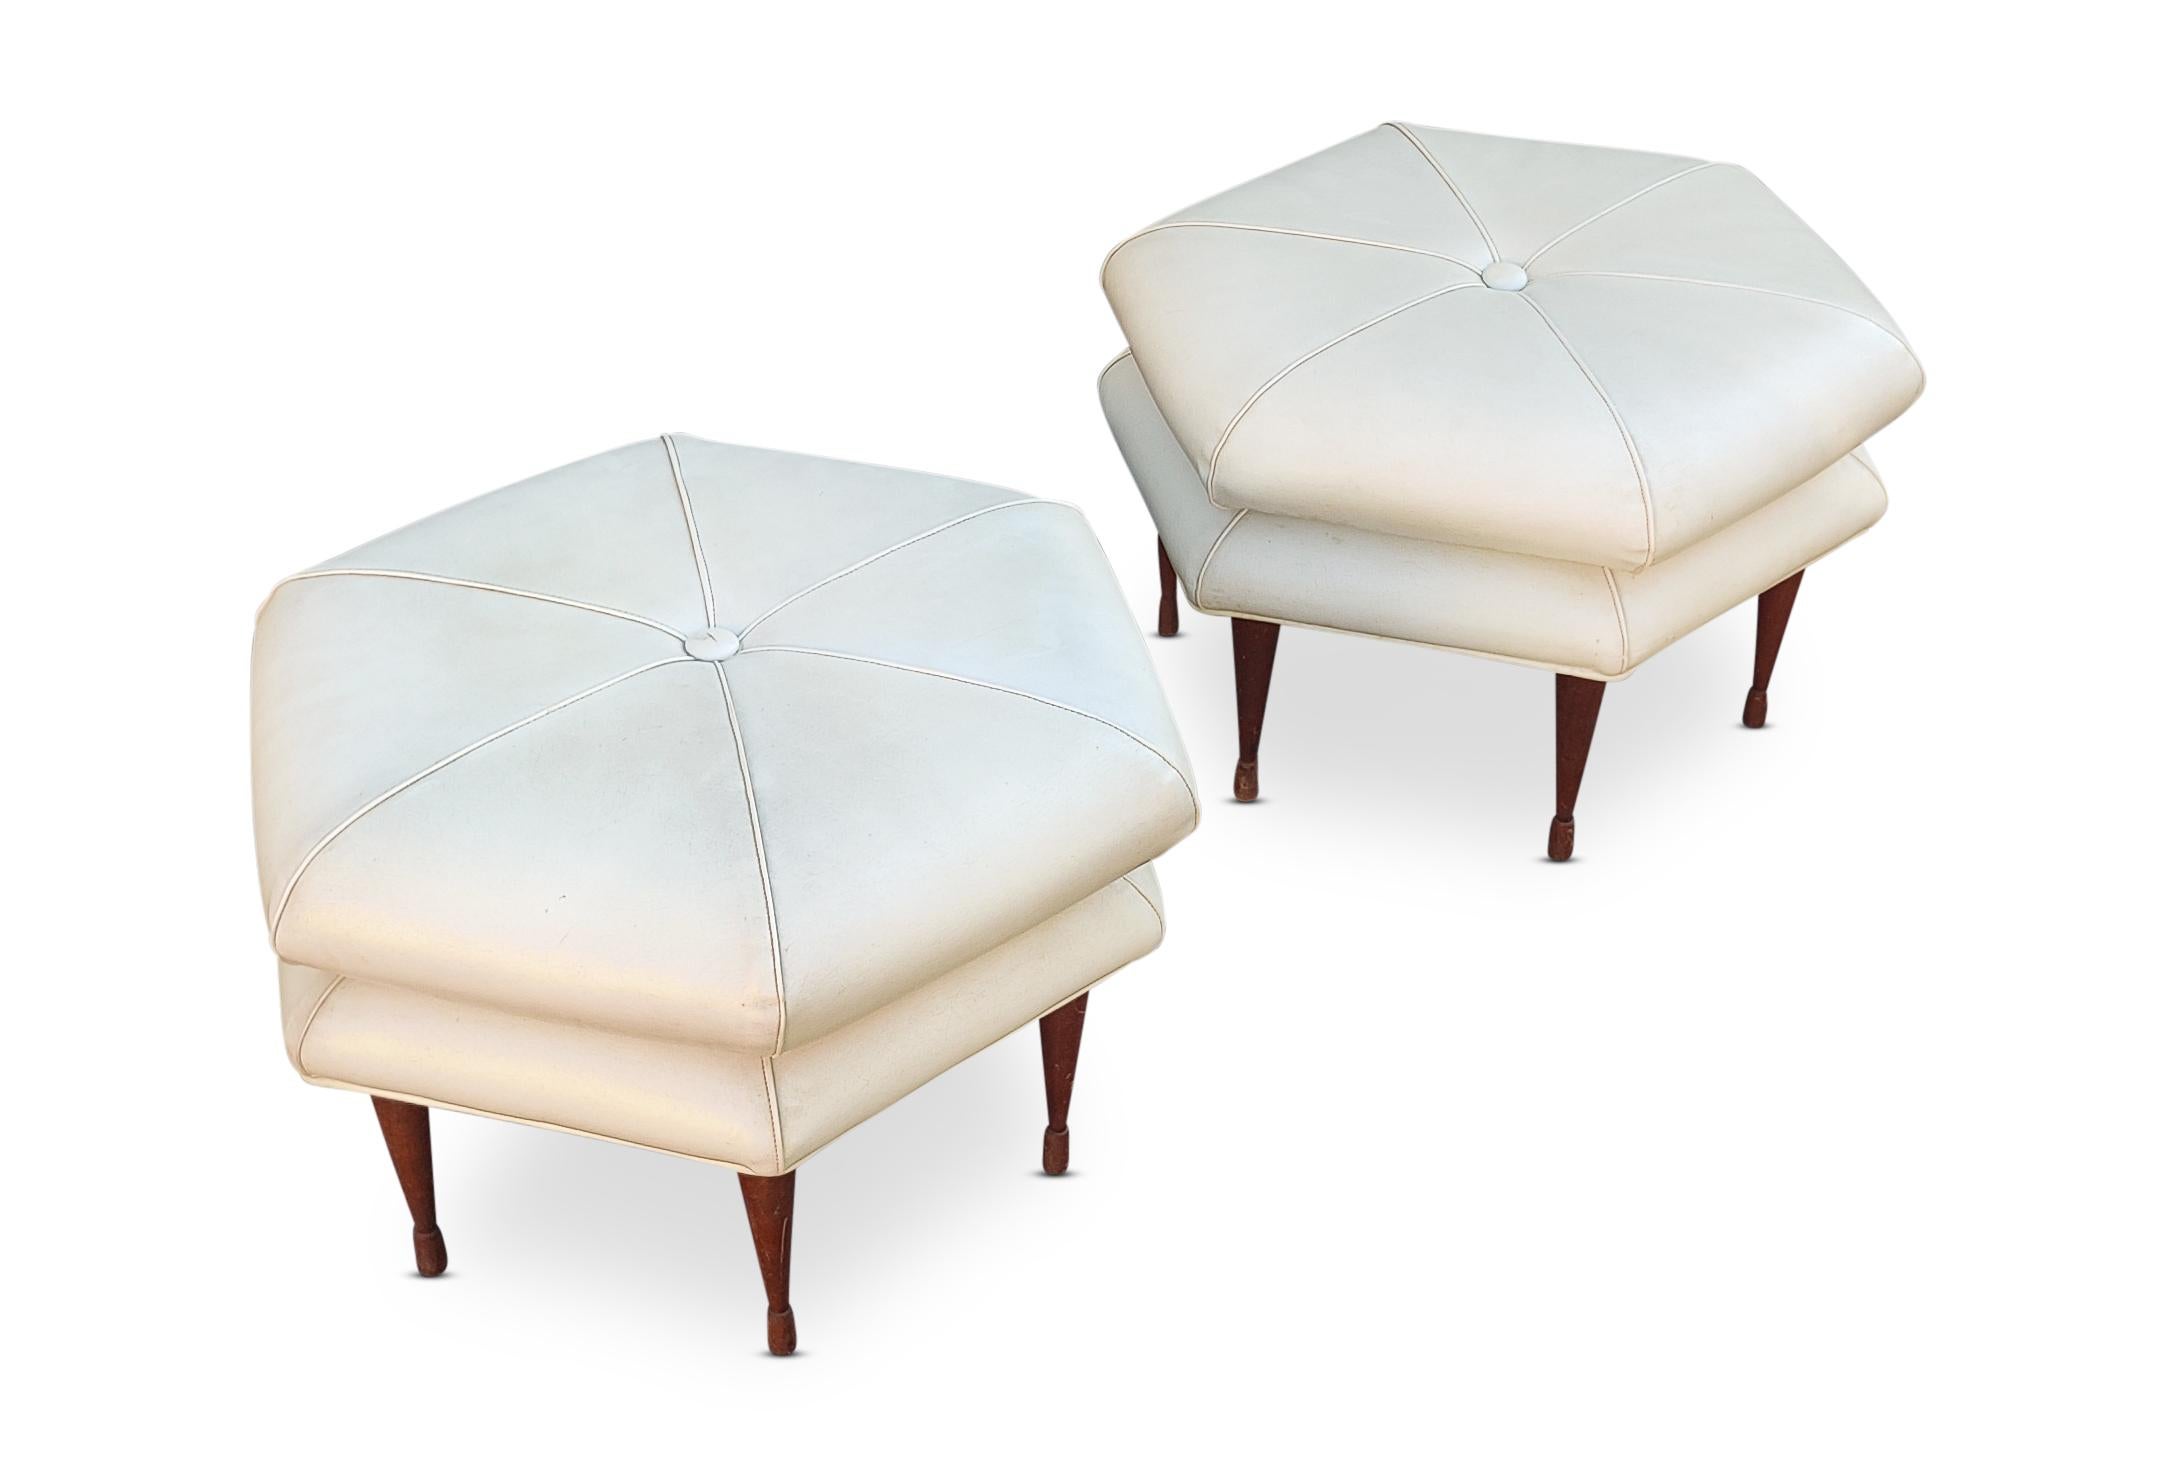 In the Mid-Century Modern style of Edward Wormley, or so many of the other greats from the 1960s design era, these hexagonal form benches, ottomans, stools, are time capsule gems! Covered in the original vinyl leatherette, atop turned walnut legs.